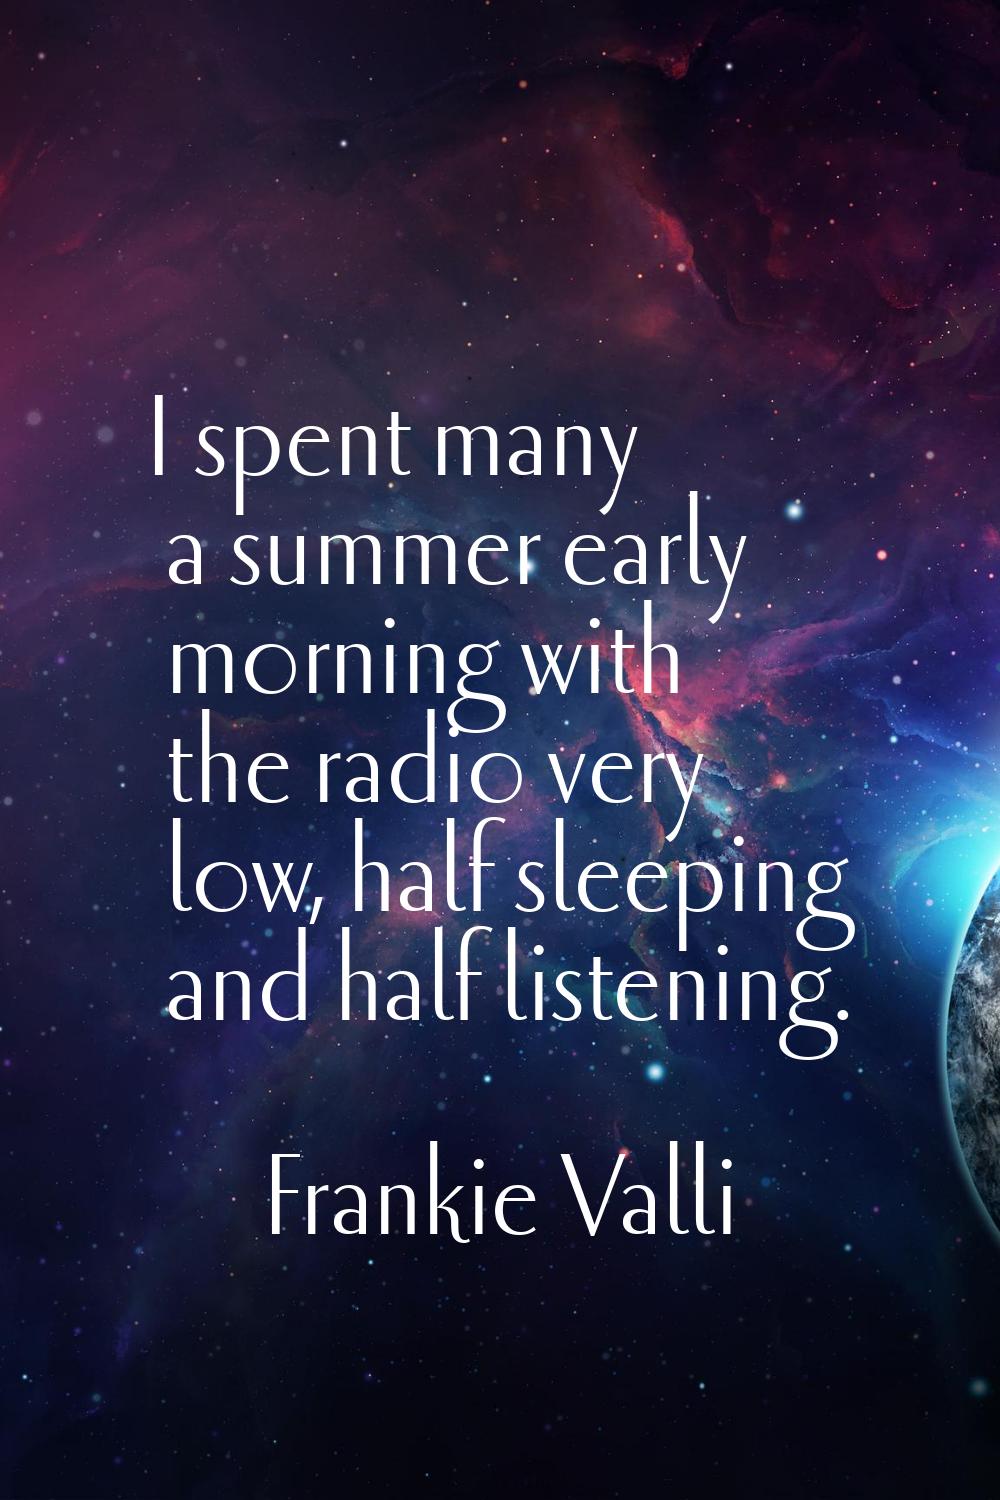 I spent many a summer early morning with the radio very low, half sleeping and half listening.